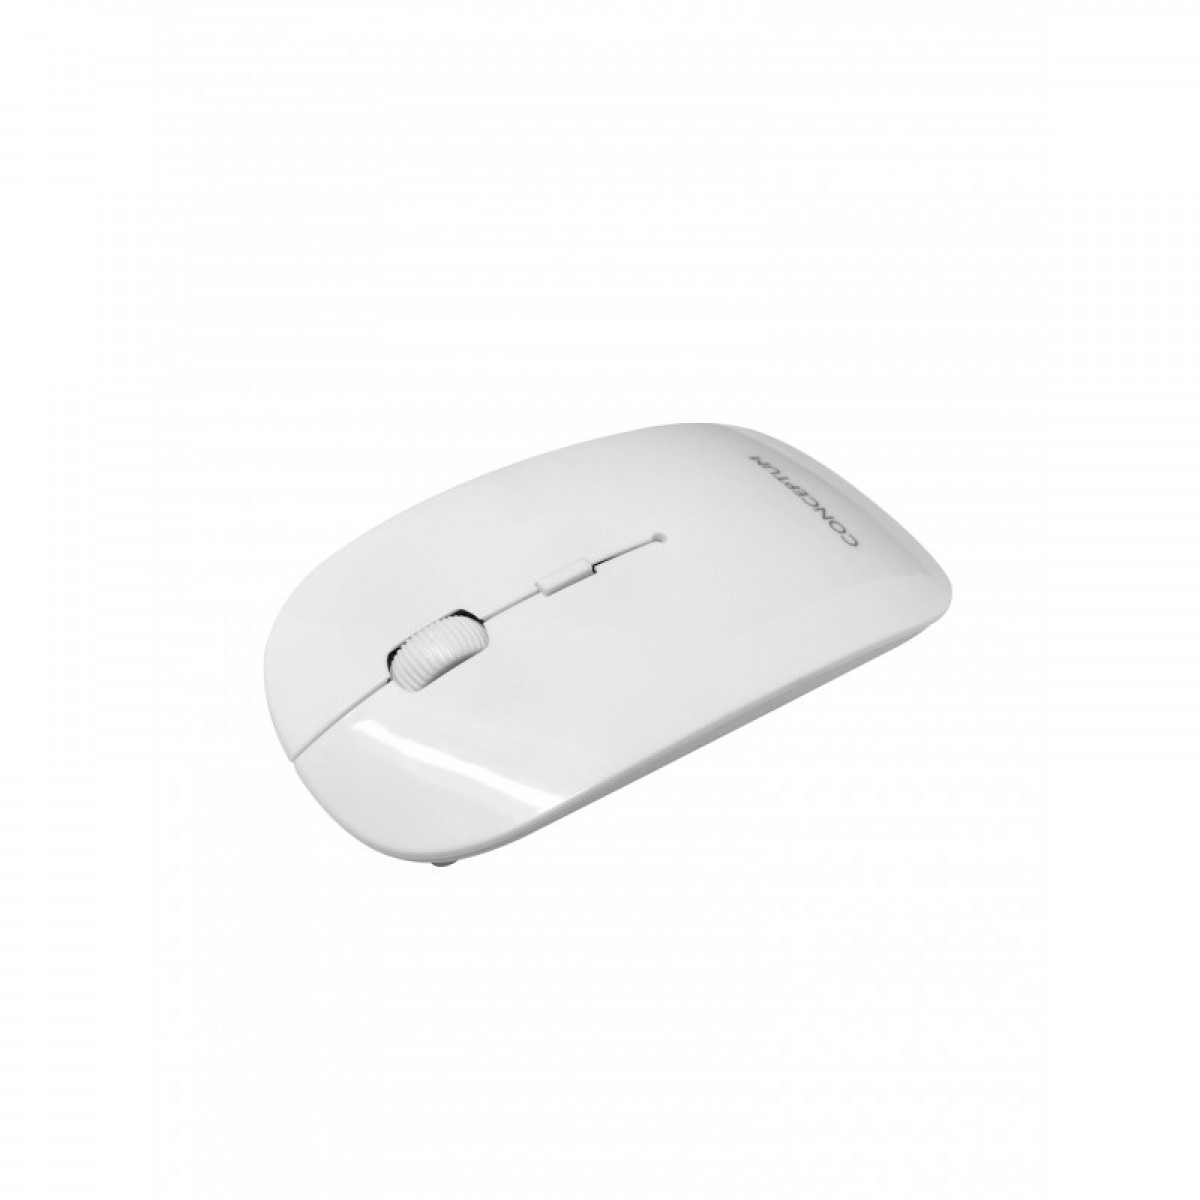 home computer android tv box CONCEPTUM WM504WH 2.4G Wireless mouse with nano receiver for PC White laptop 1600 DPI